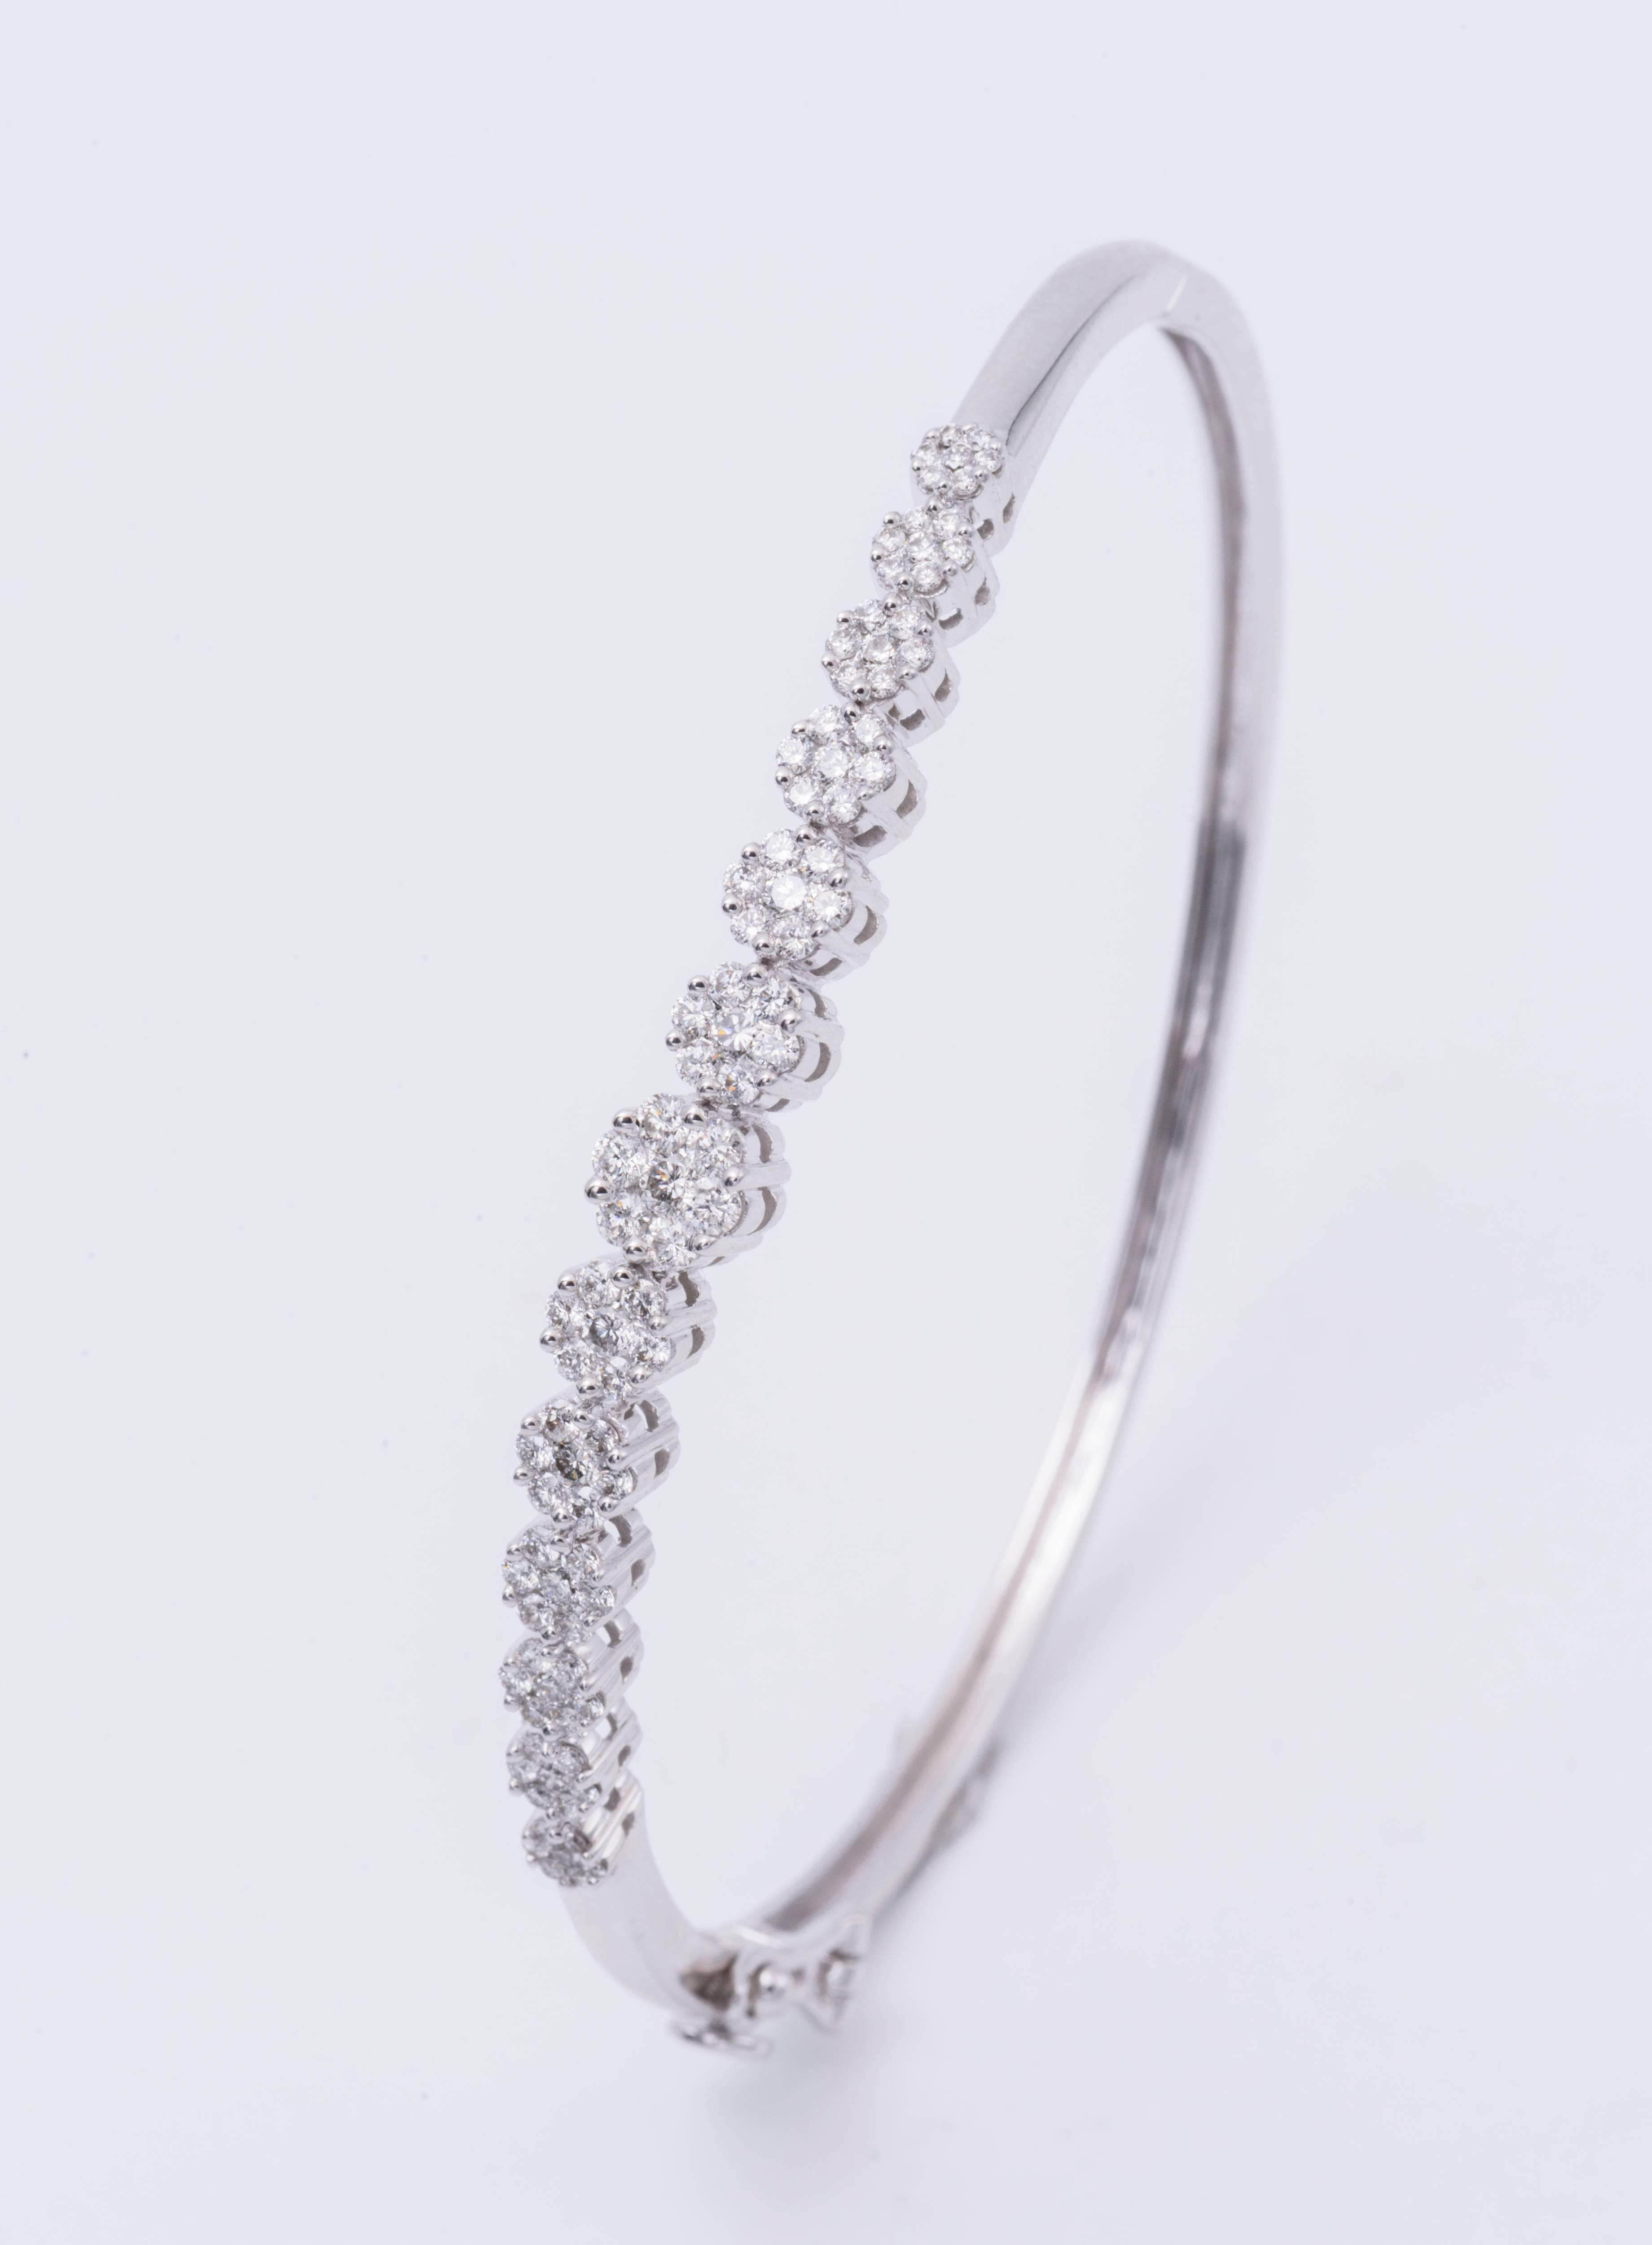 7" Bangle in a 14K White gold with a total diamond weight of 1.25 Carats